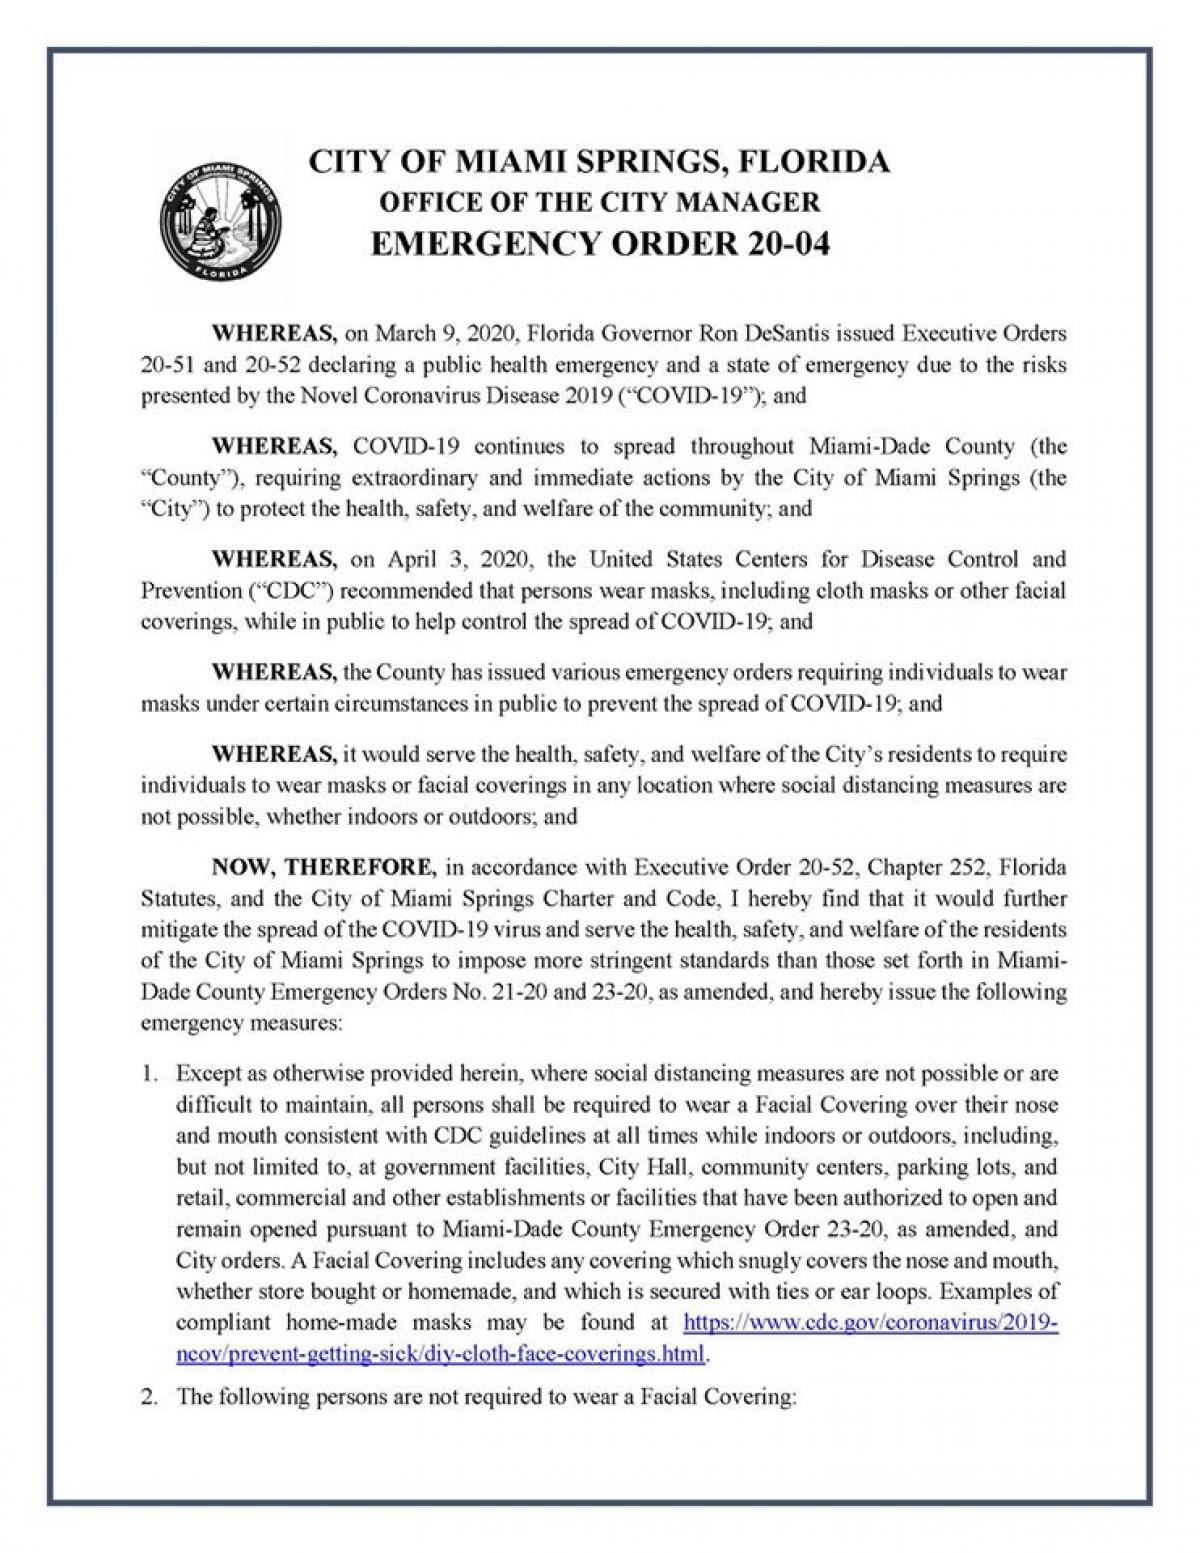 City Emergency Order 20-04 Makes Wearing Facial Coverings or Masks in Public Mandatory (With Certain Exceptions)